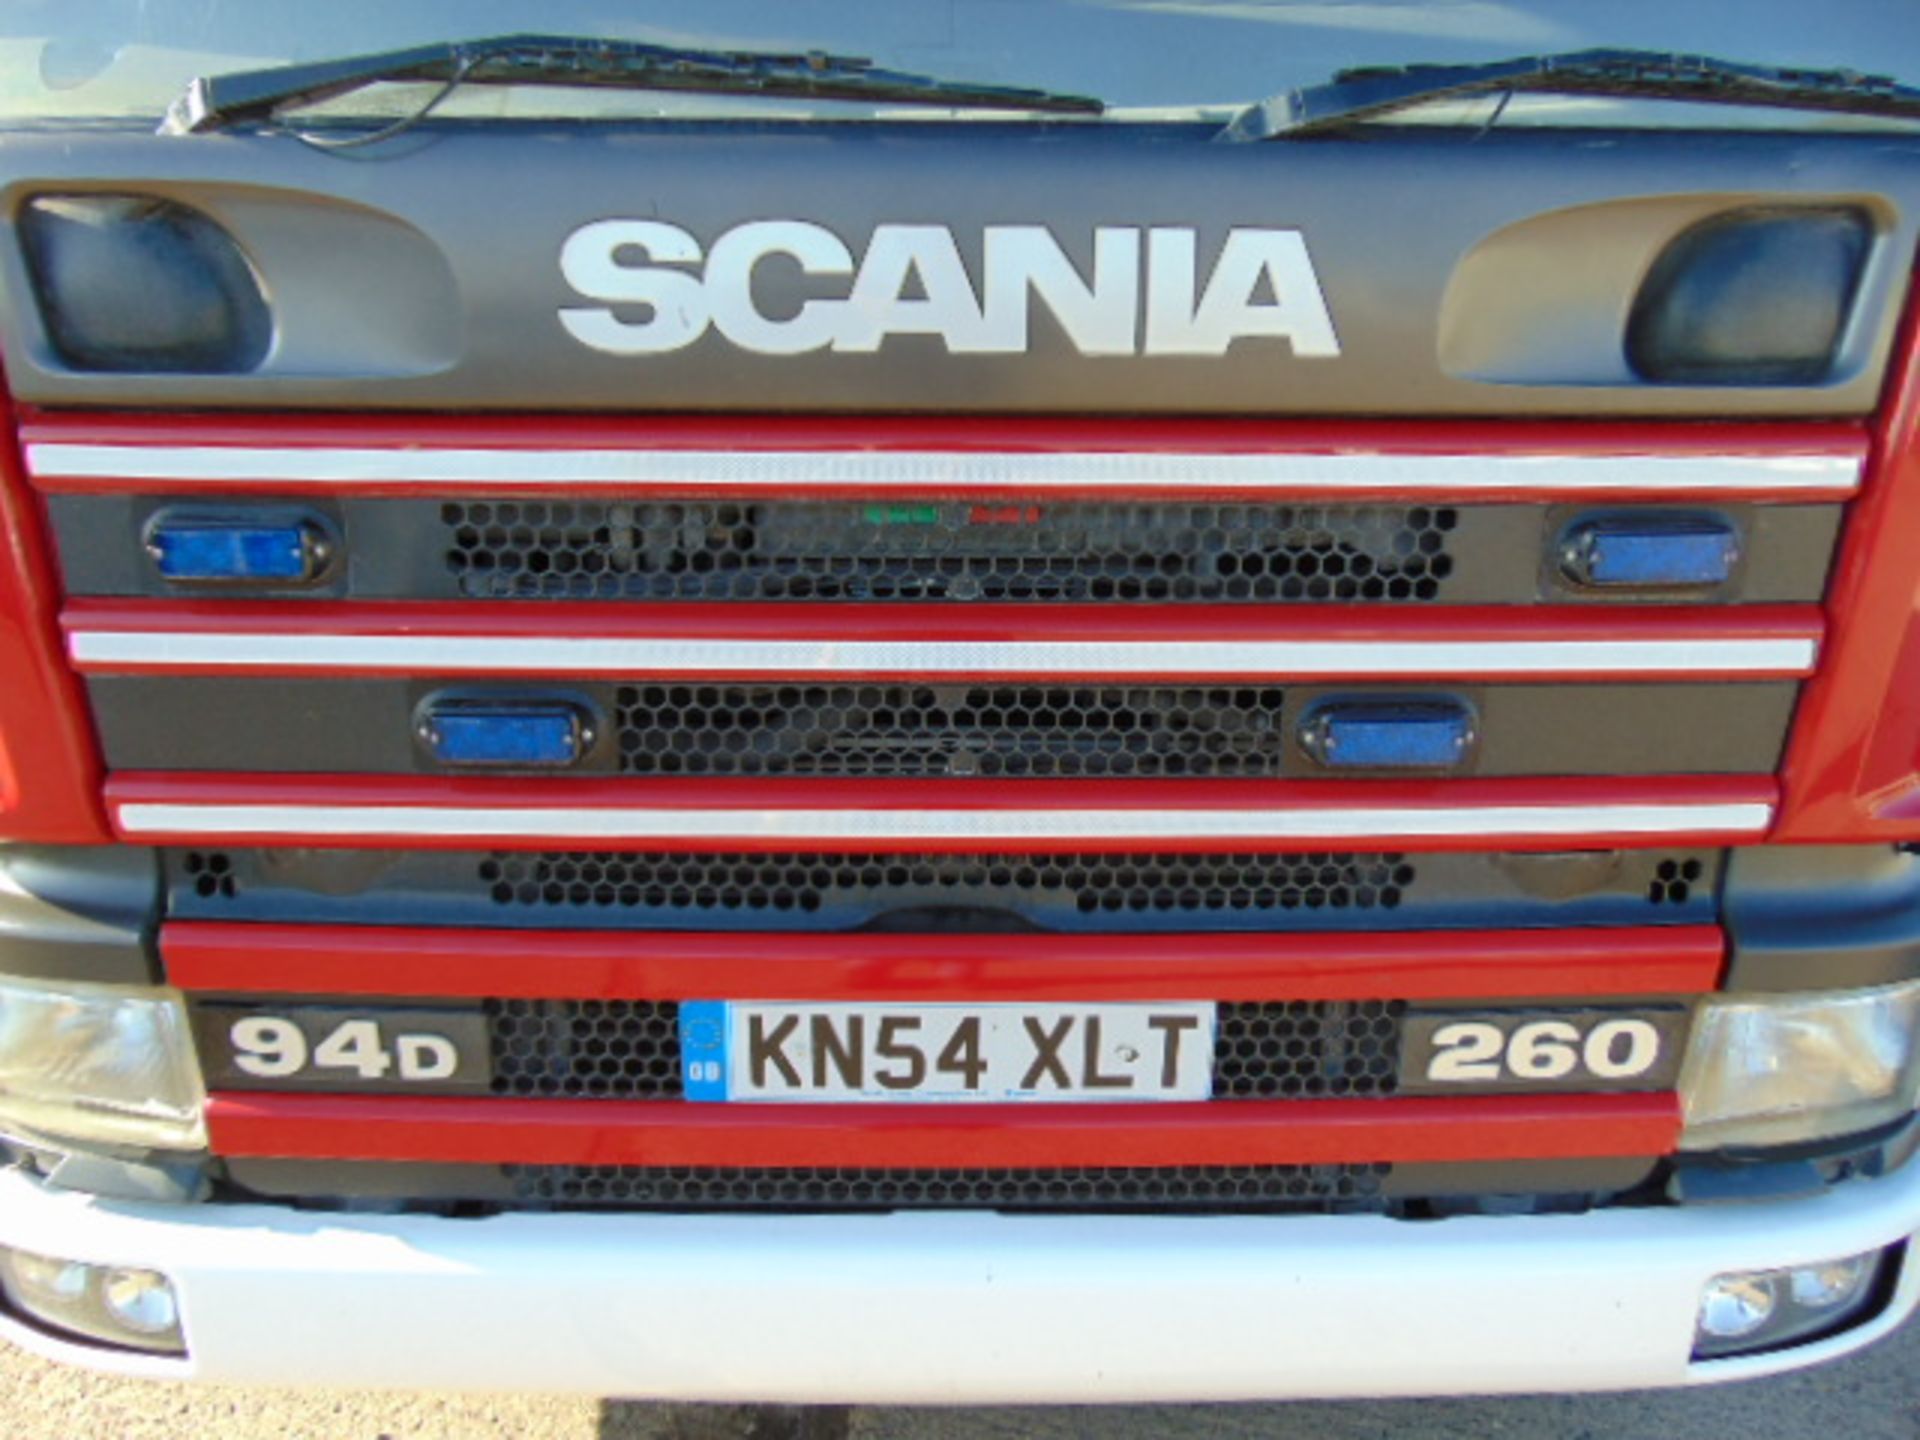 Scania 94D 260 / Emergency One Fire Engine - Image 9 of 28